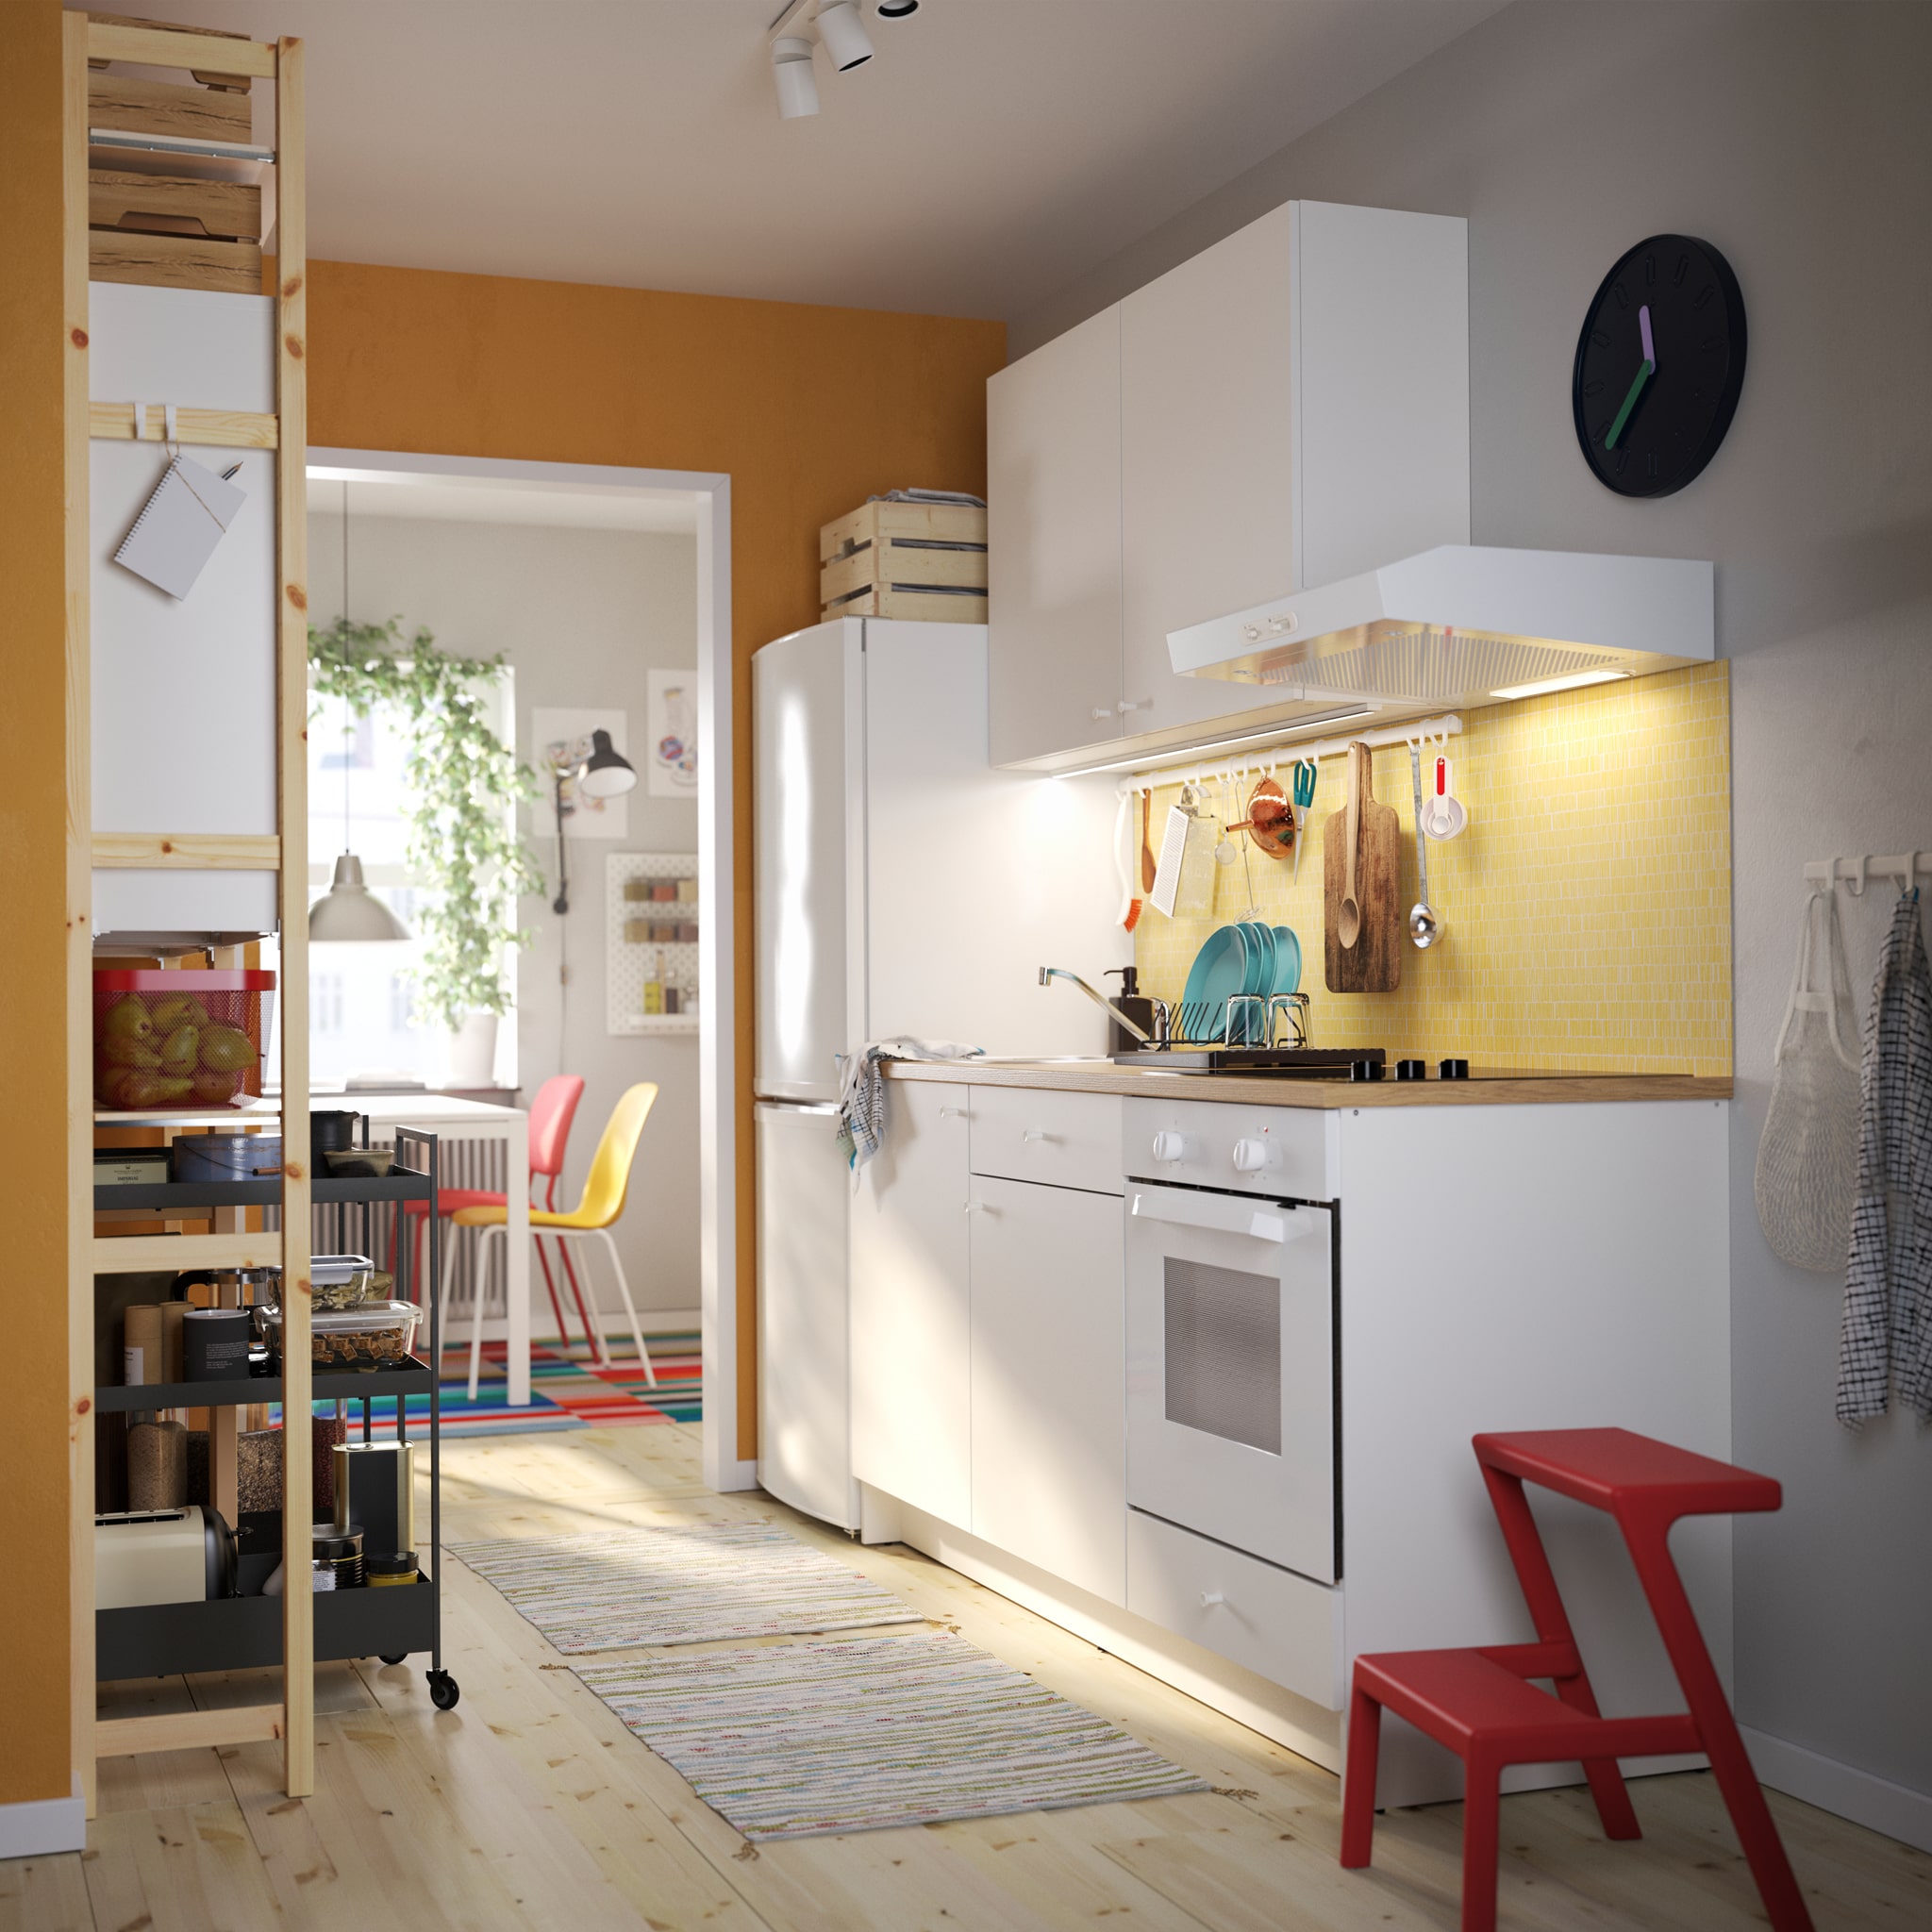  A KNOXHULT kitchen in white, a red step stool, a shelving unit in pine, black trolleys and colourful kitchen chairs.